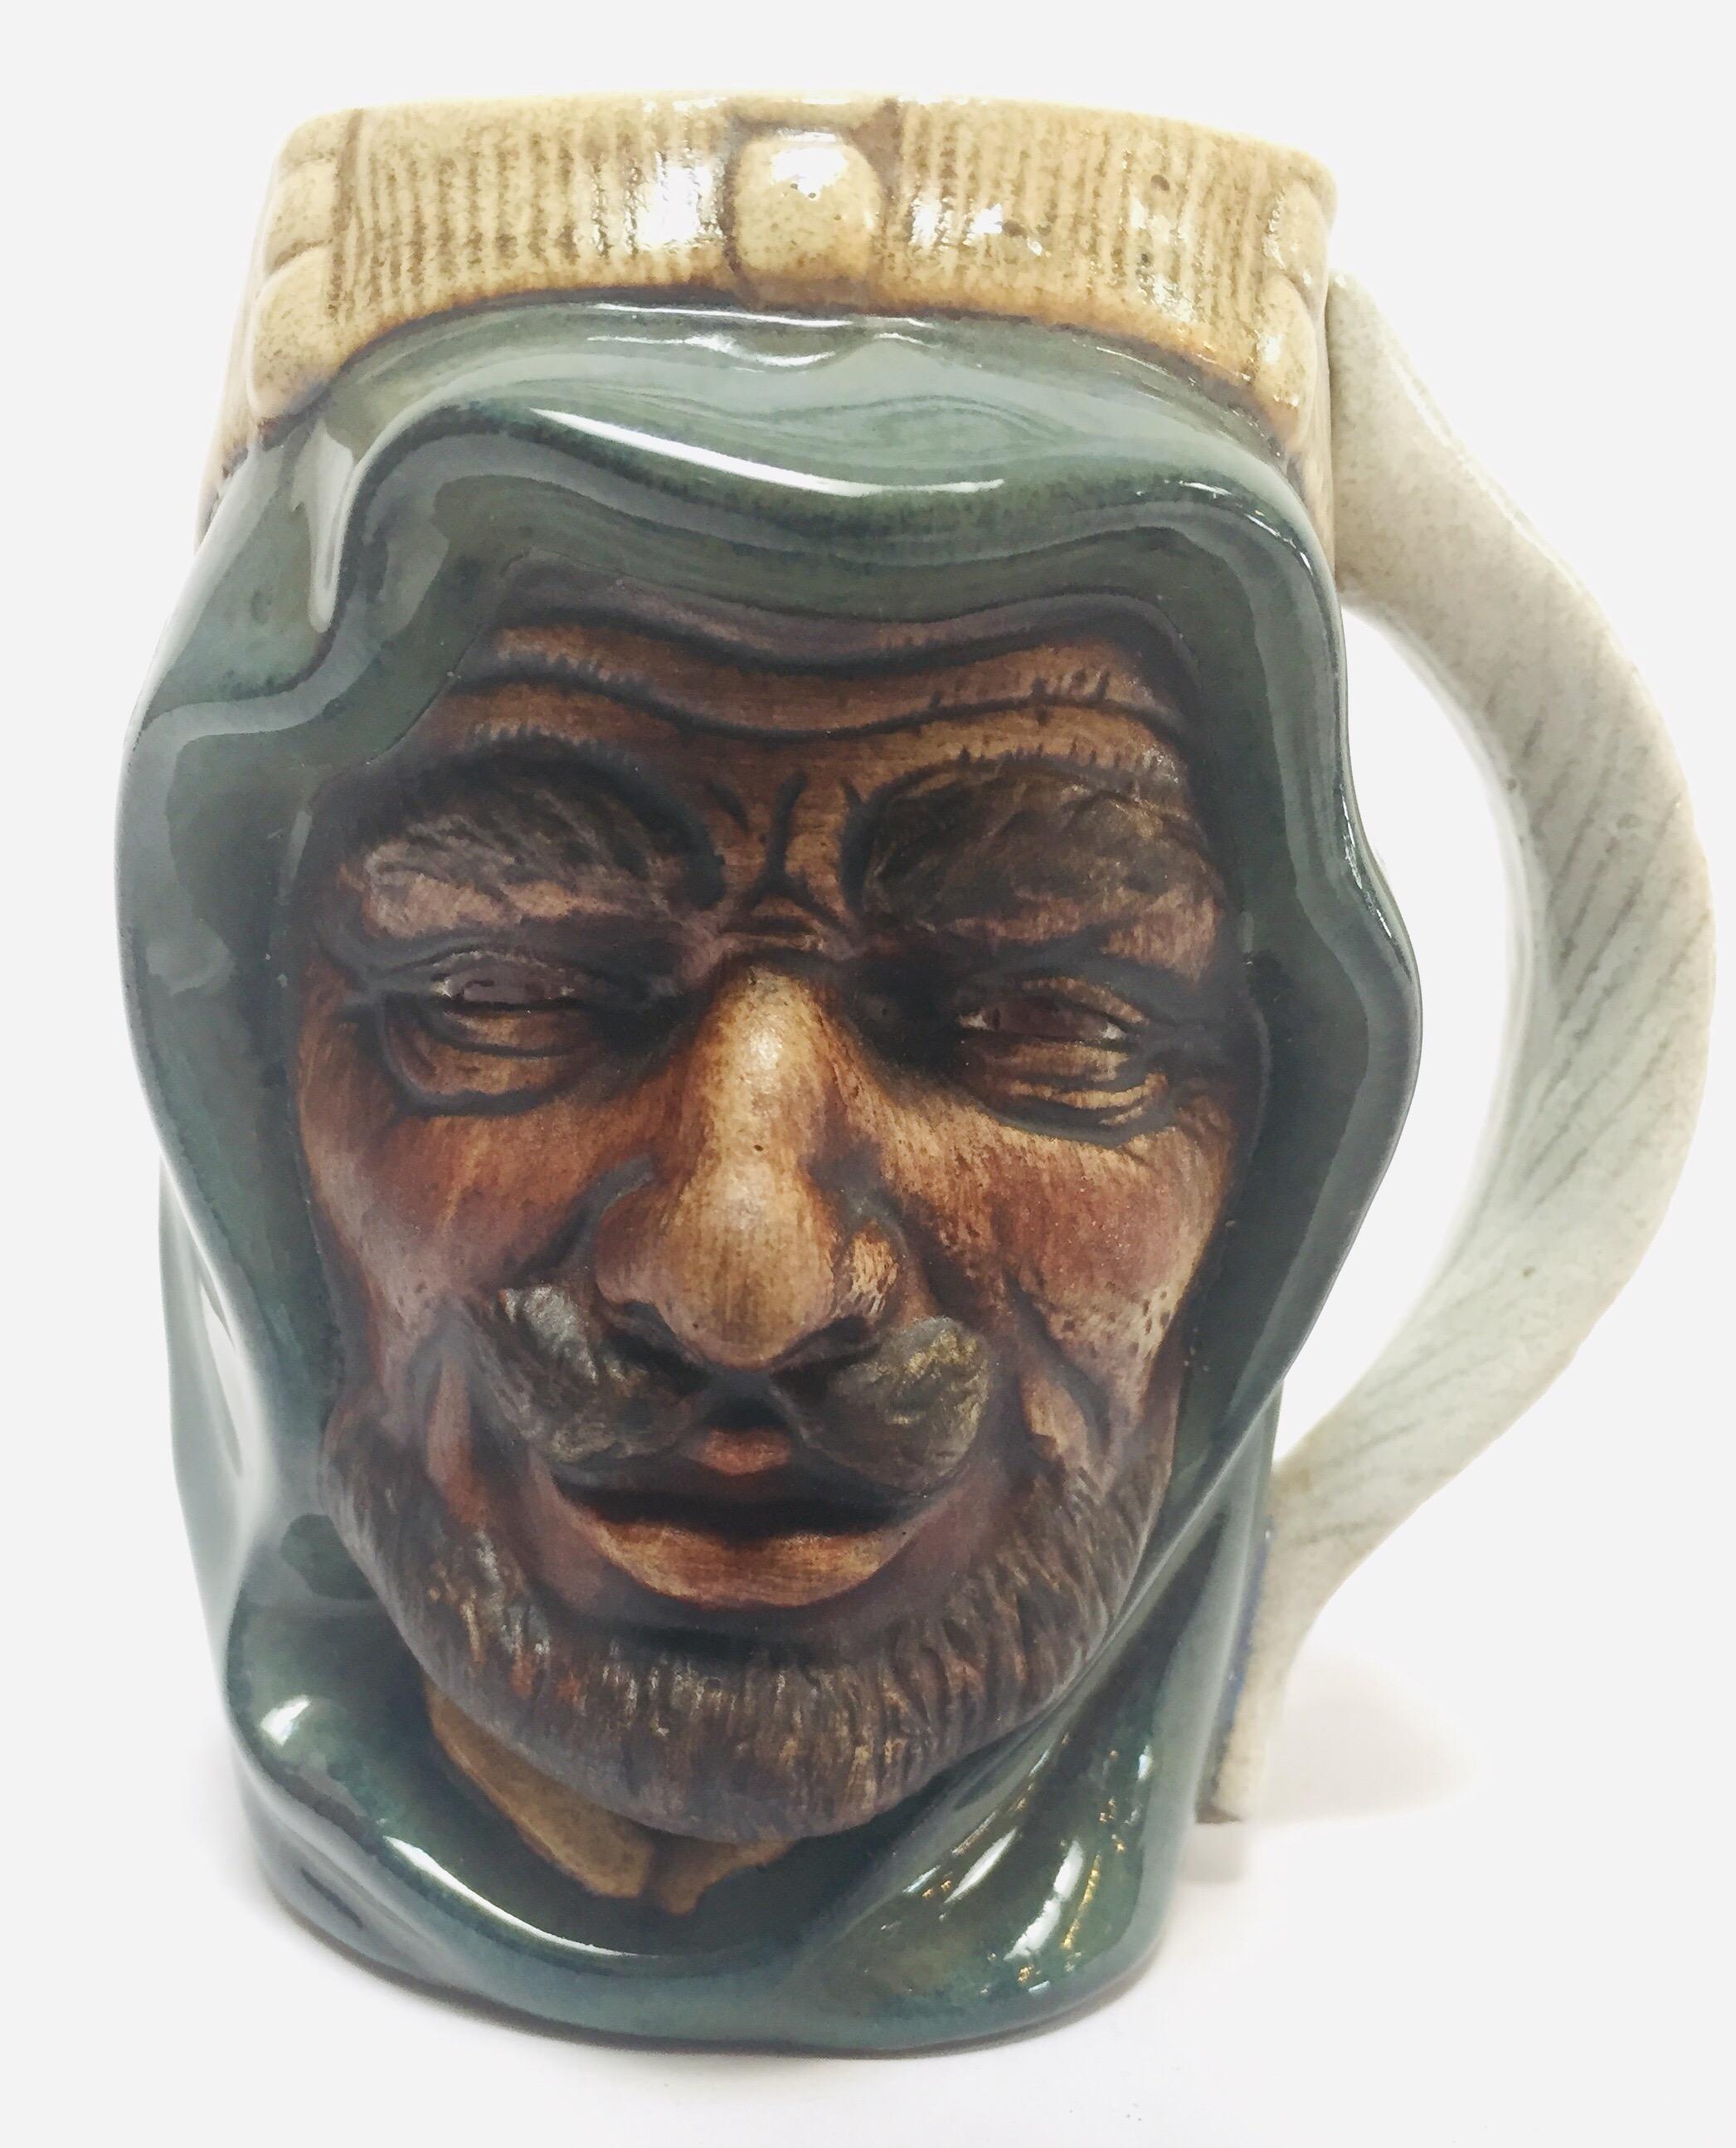 Hand-Crafted Vintage Ceramic Middle Eastern Arab Man Character Toby Mug